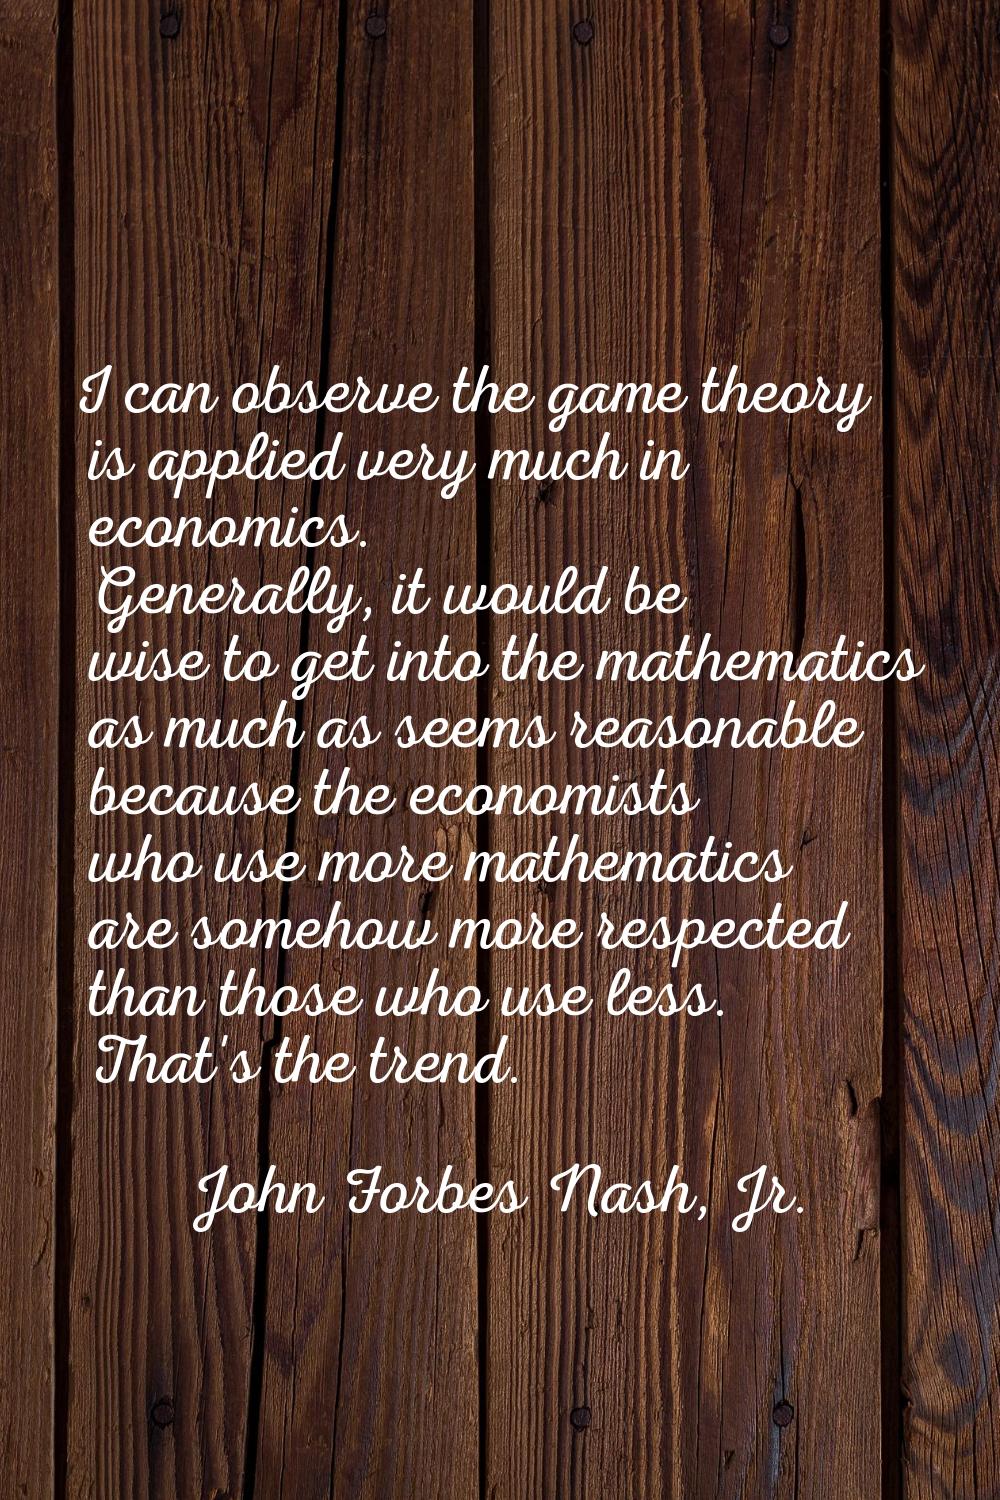 I can observe the game theory is applied very much in economics. Generally, it would be wise to get